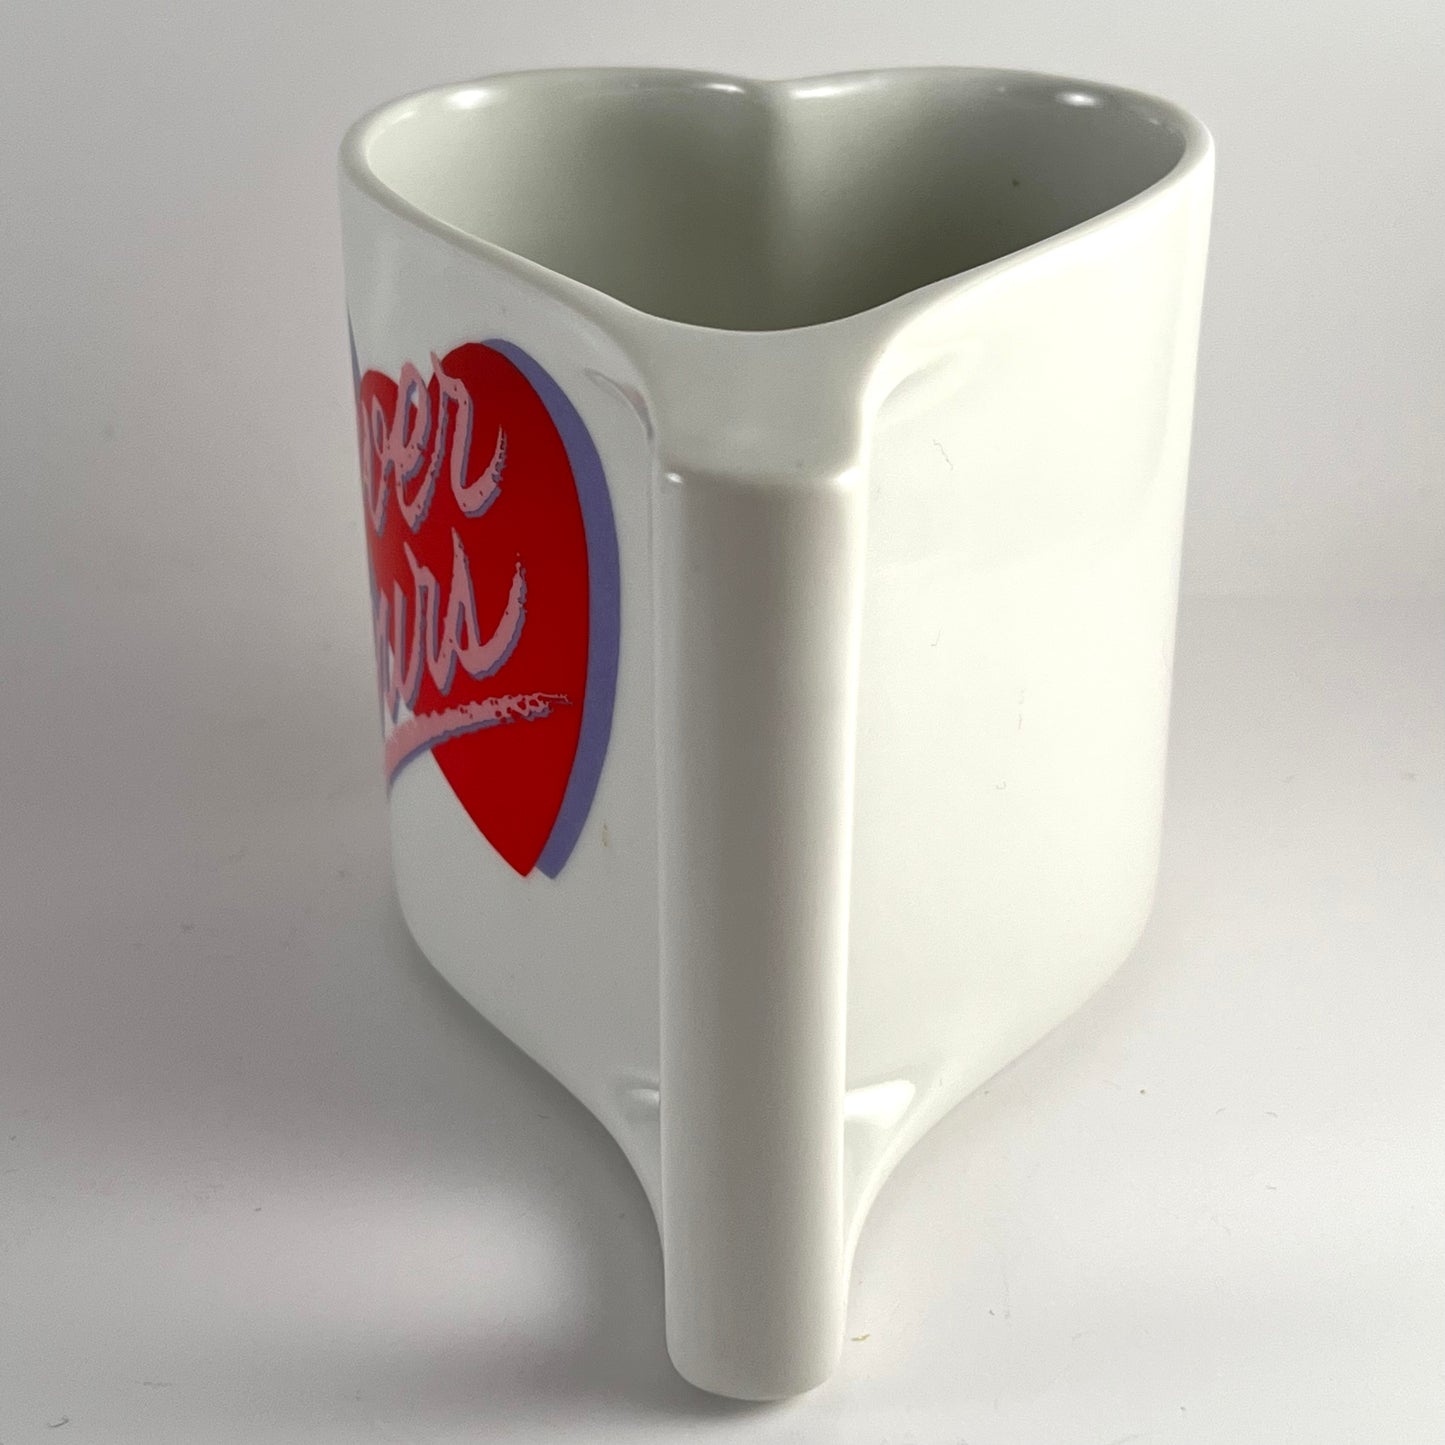 Late 80s/ Early 90s Avon 'Forever Yours' Heart Mug